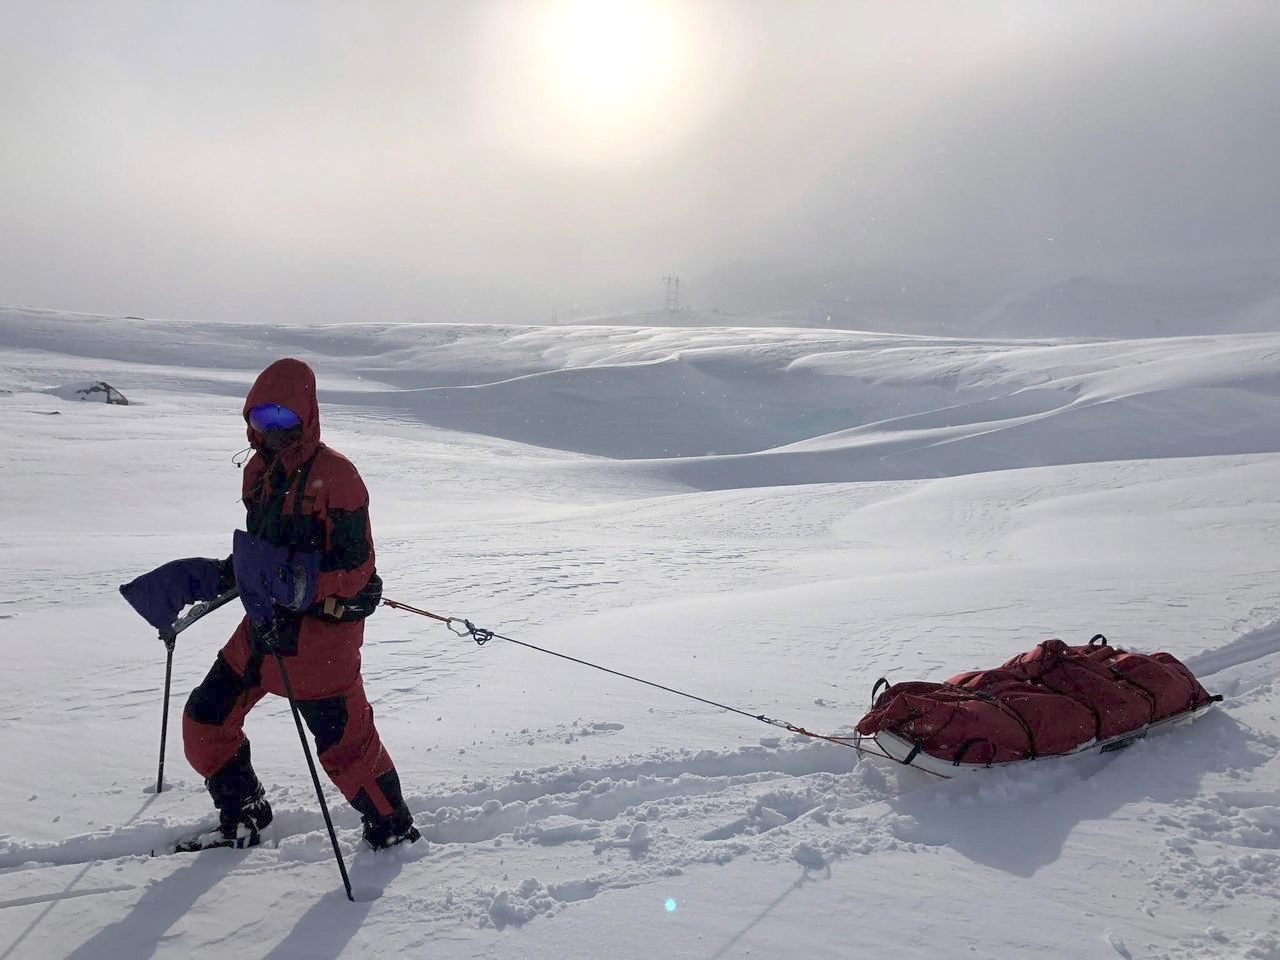 Harpreet Chandi took 40 days to complete her solo 700-mile trek to the South Pole, skiing while pulling a 200-pound pulk, or cargo sled. Here, she trains for the adventure in Norway.